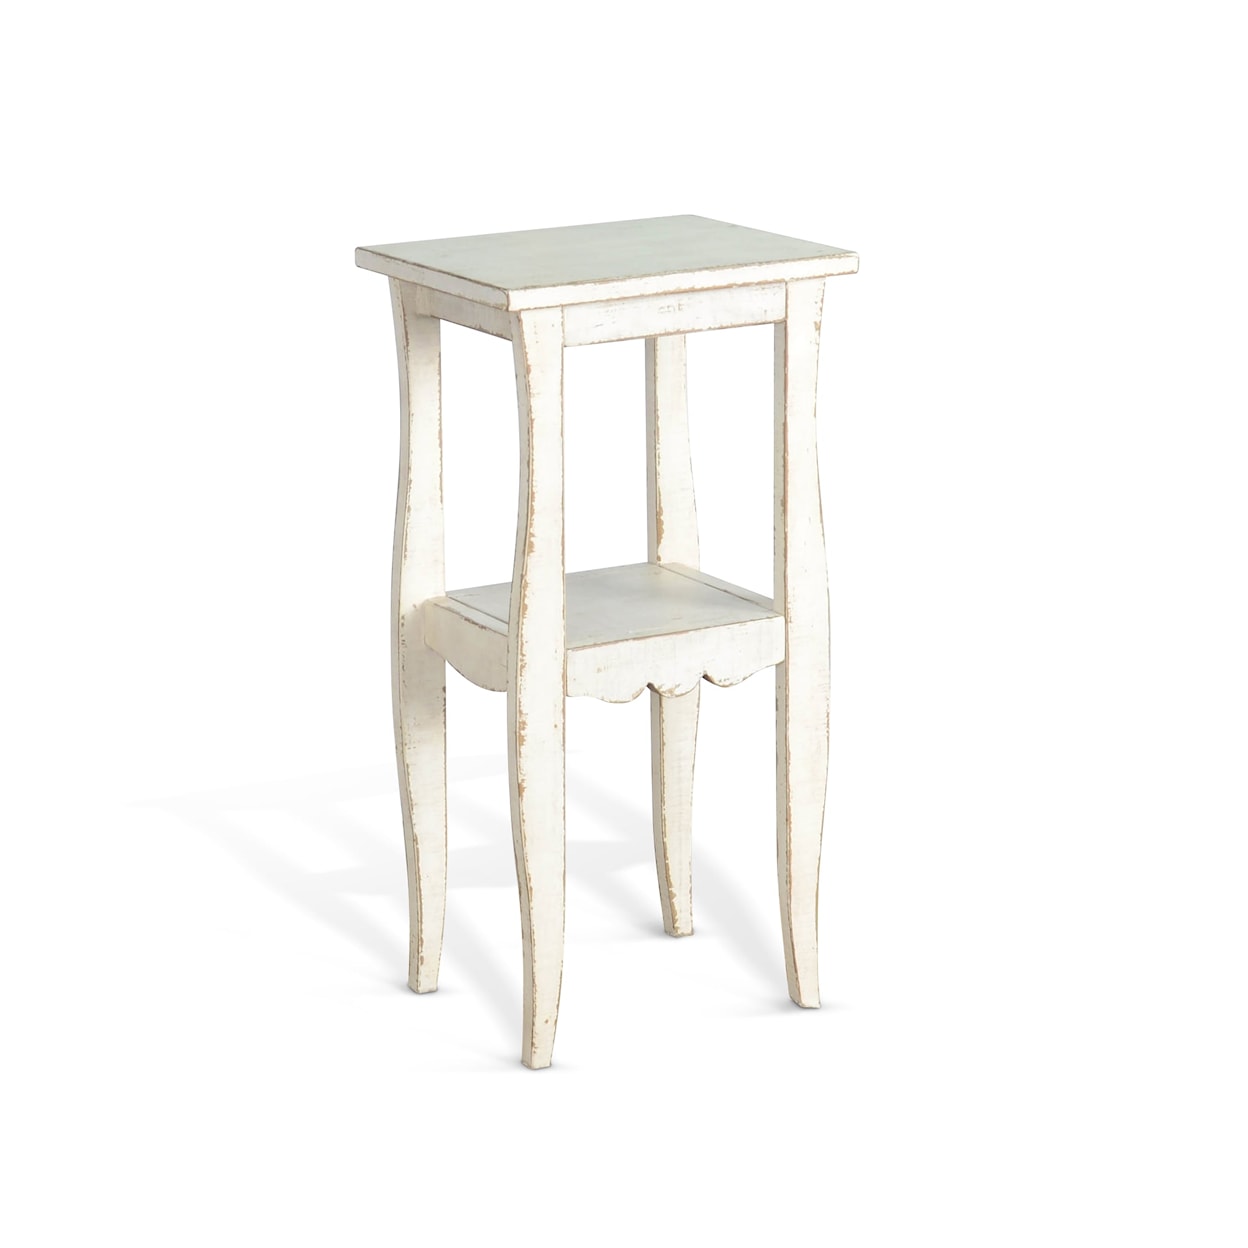 Sunny Designs Marina White Sand Side Table